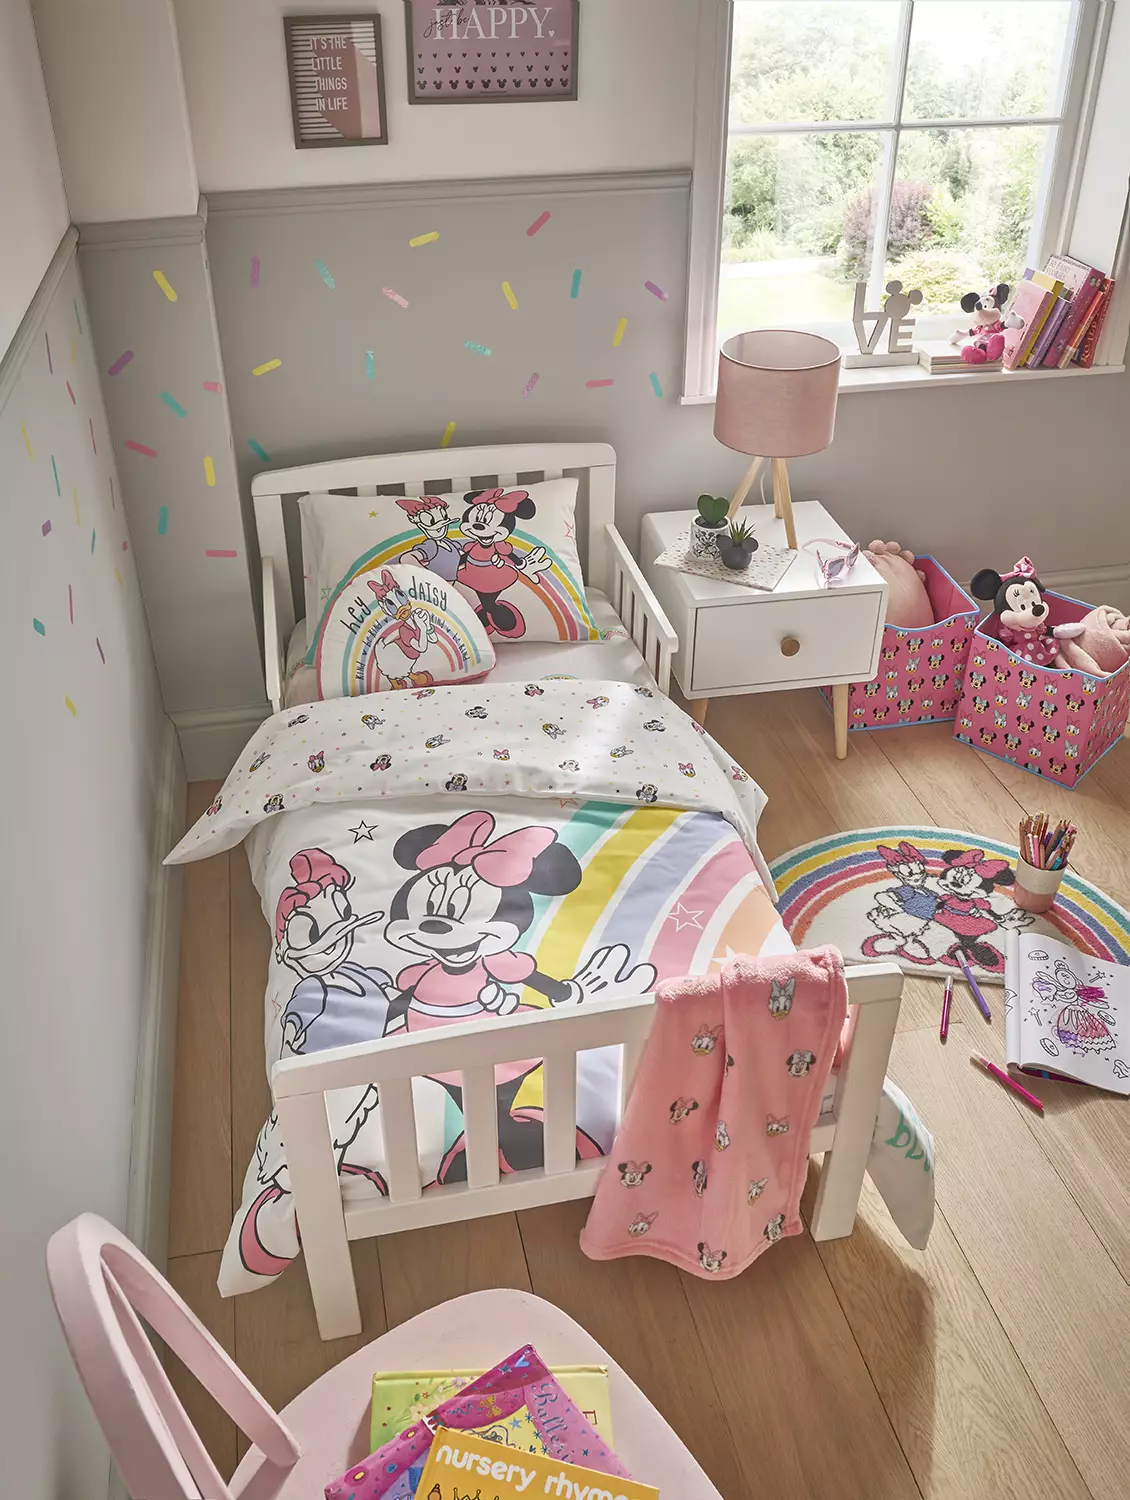 The new range is perfect for any young Disney fan (